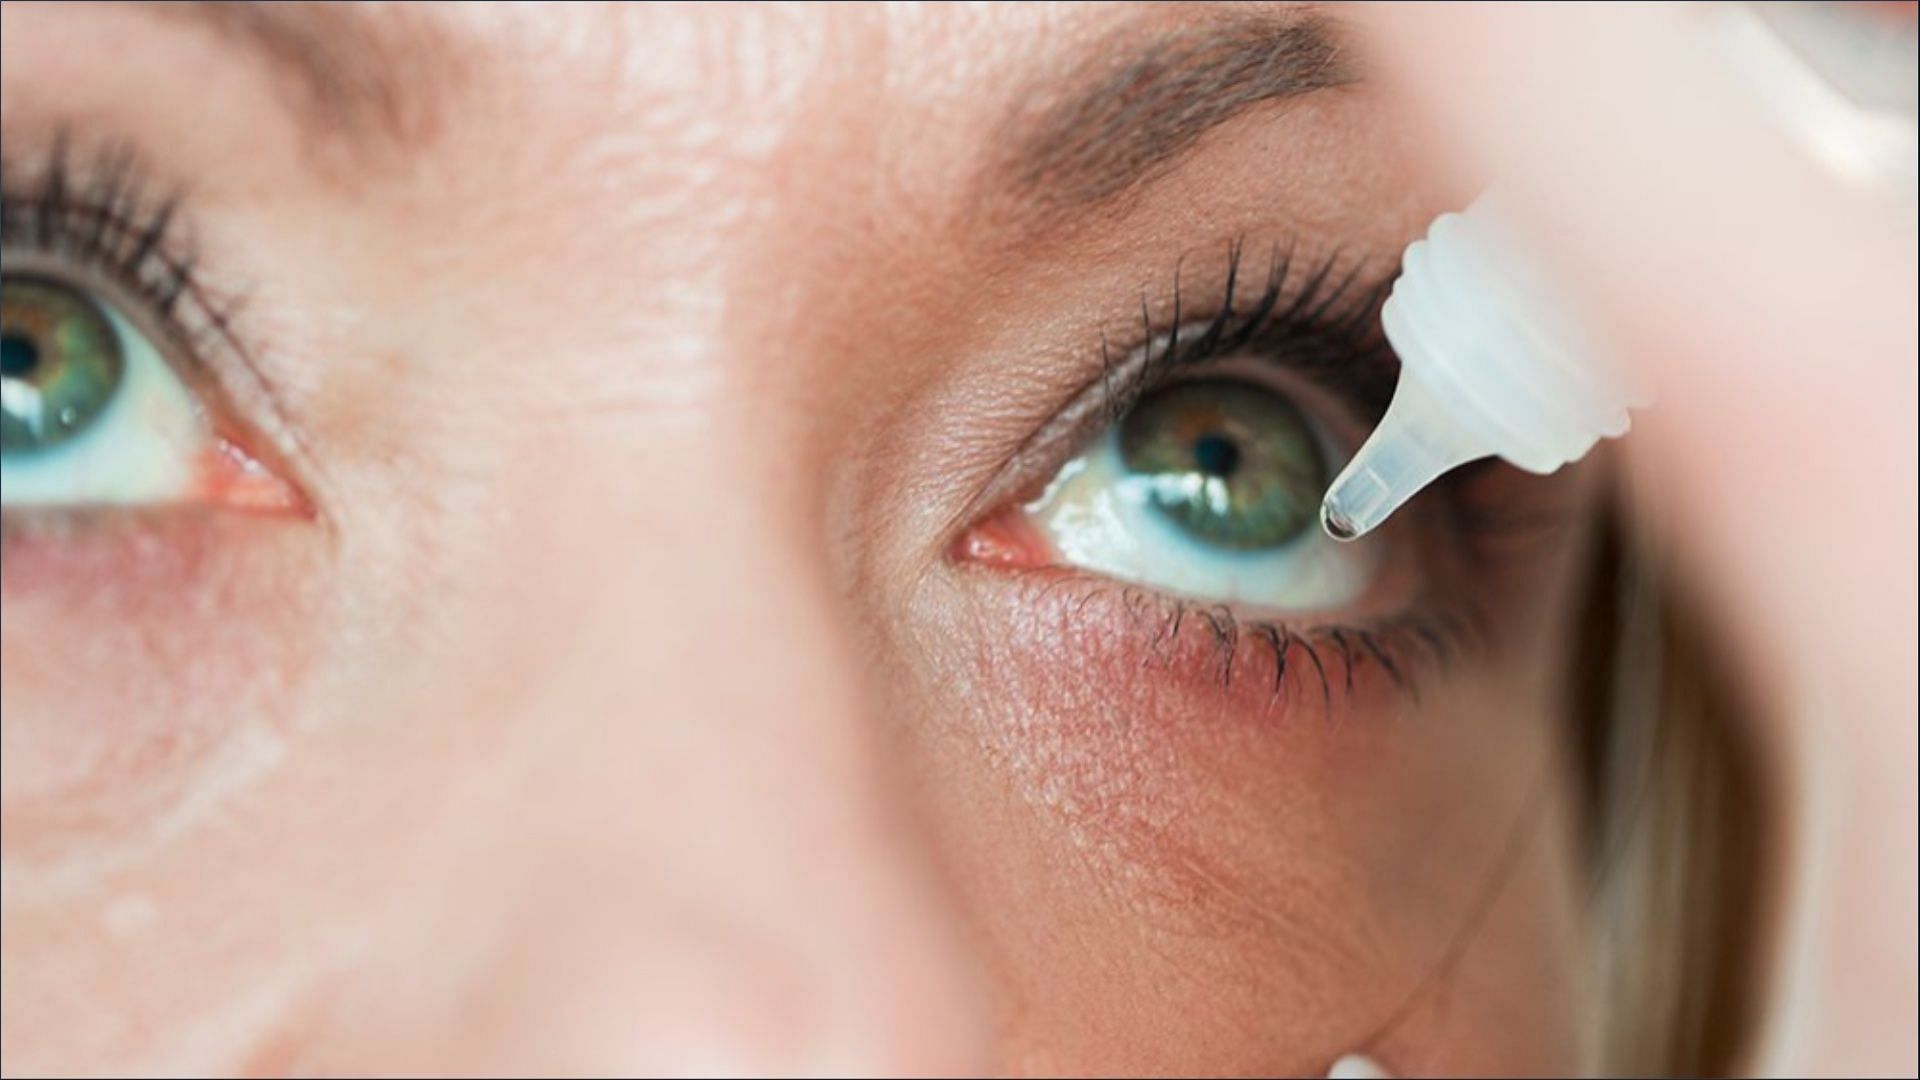 The recall extension includes CVS Health eye drops and Equate Hydration PF Lubricant eye drops (Image via FDA)